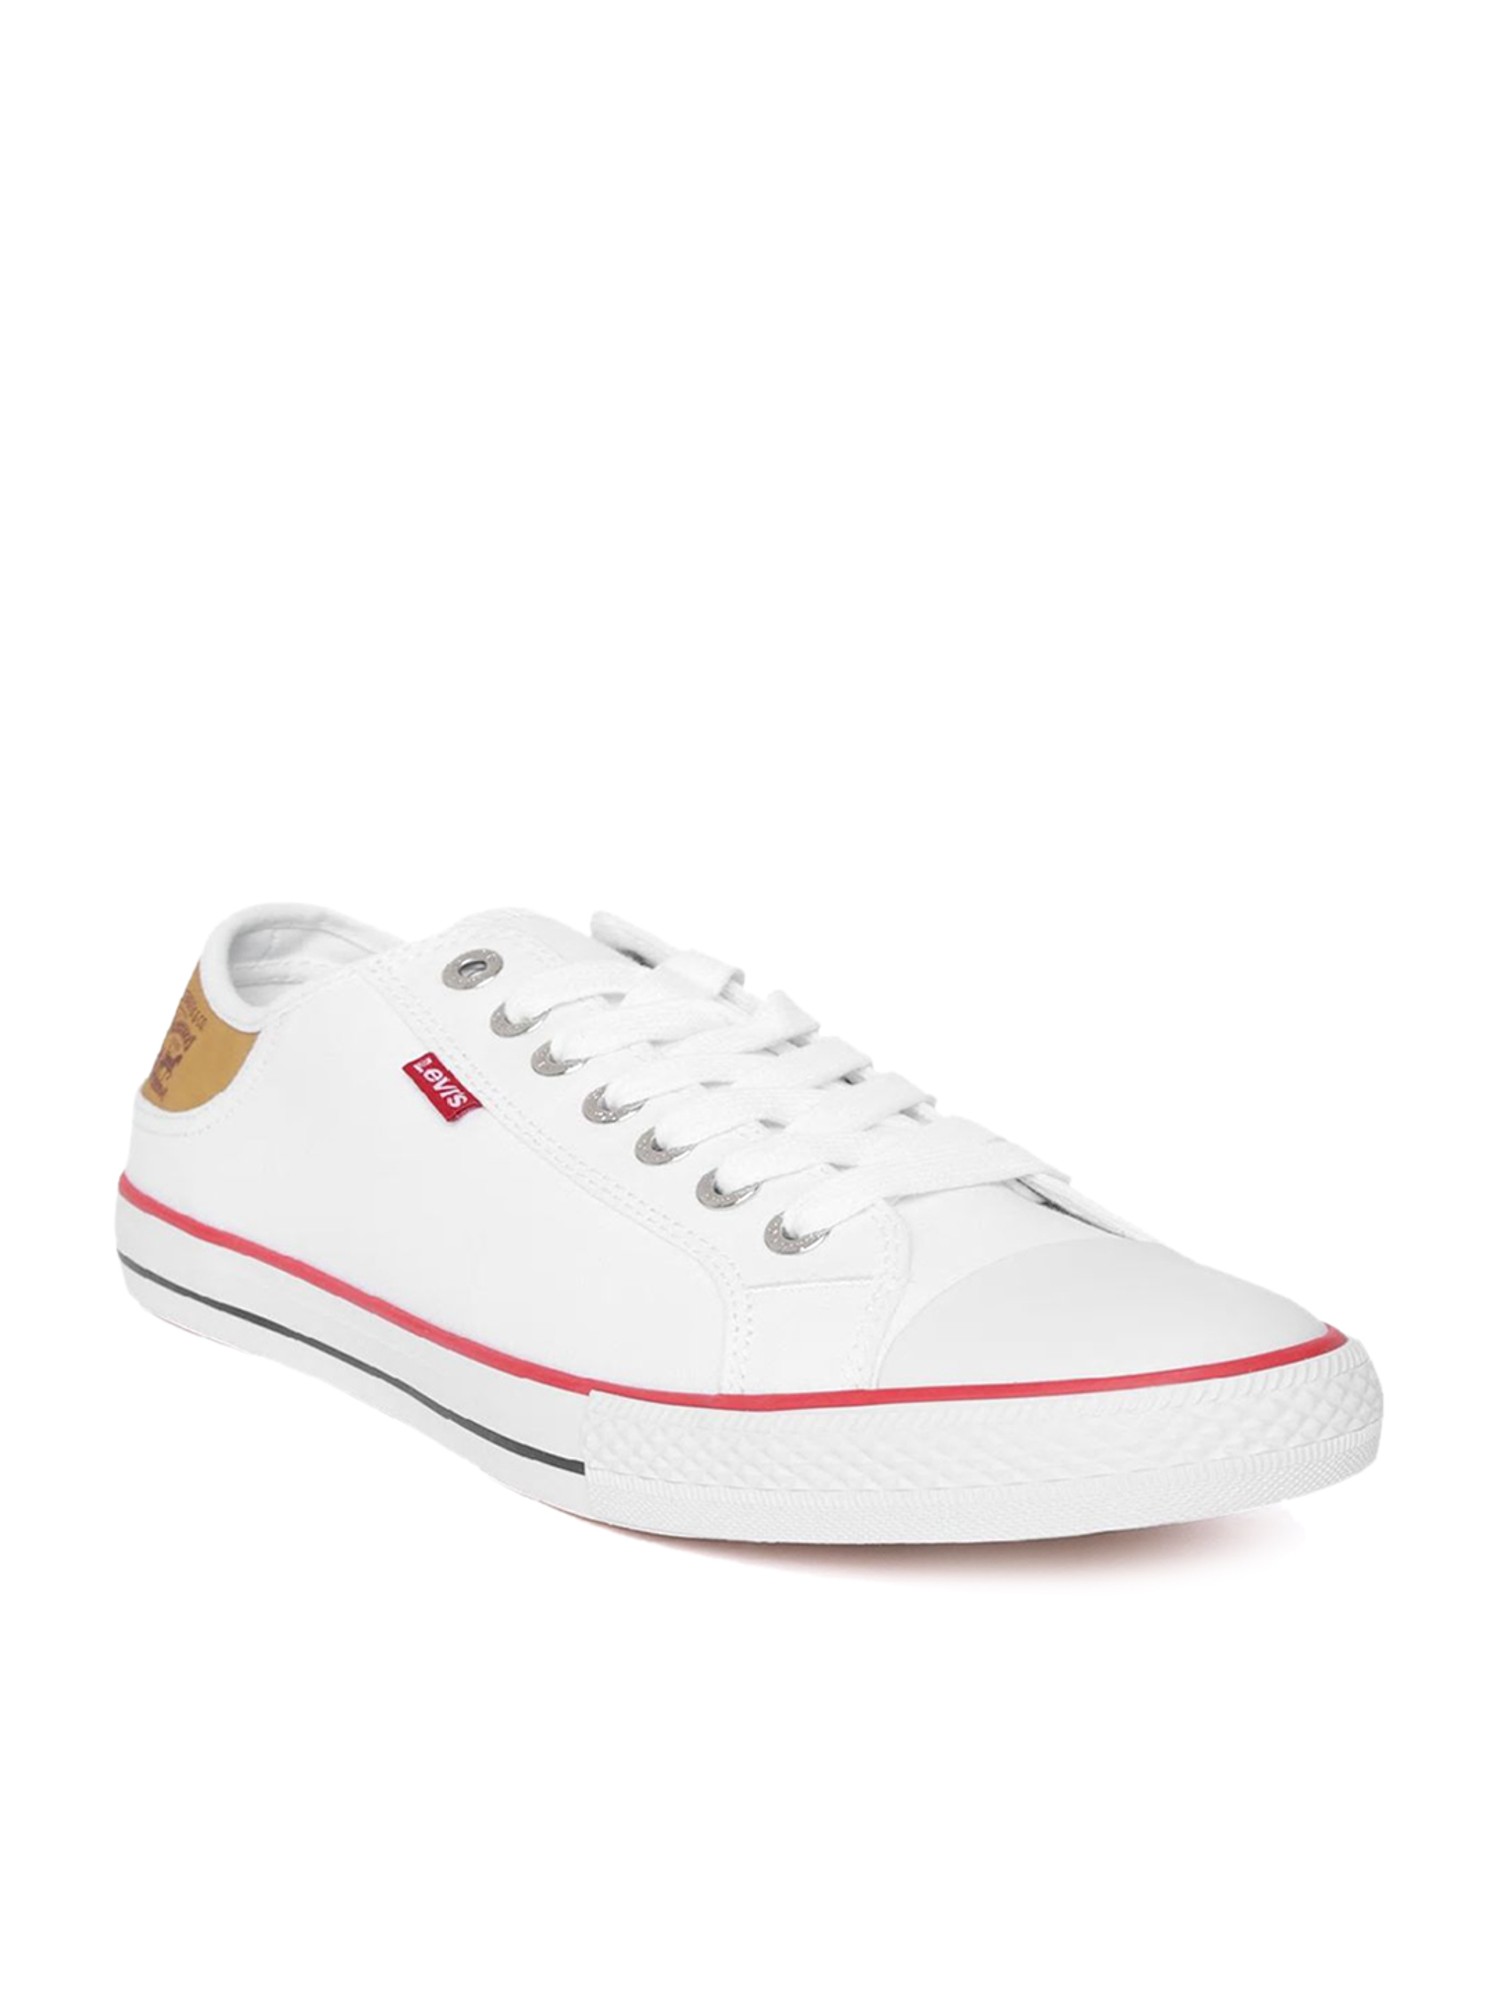 Levis Synthetic Leather Sneaker for Men - White